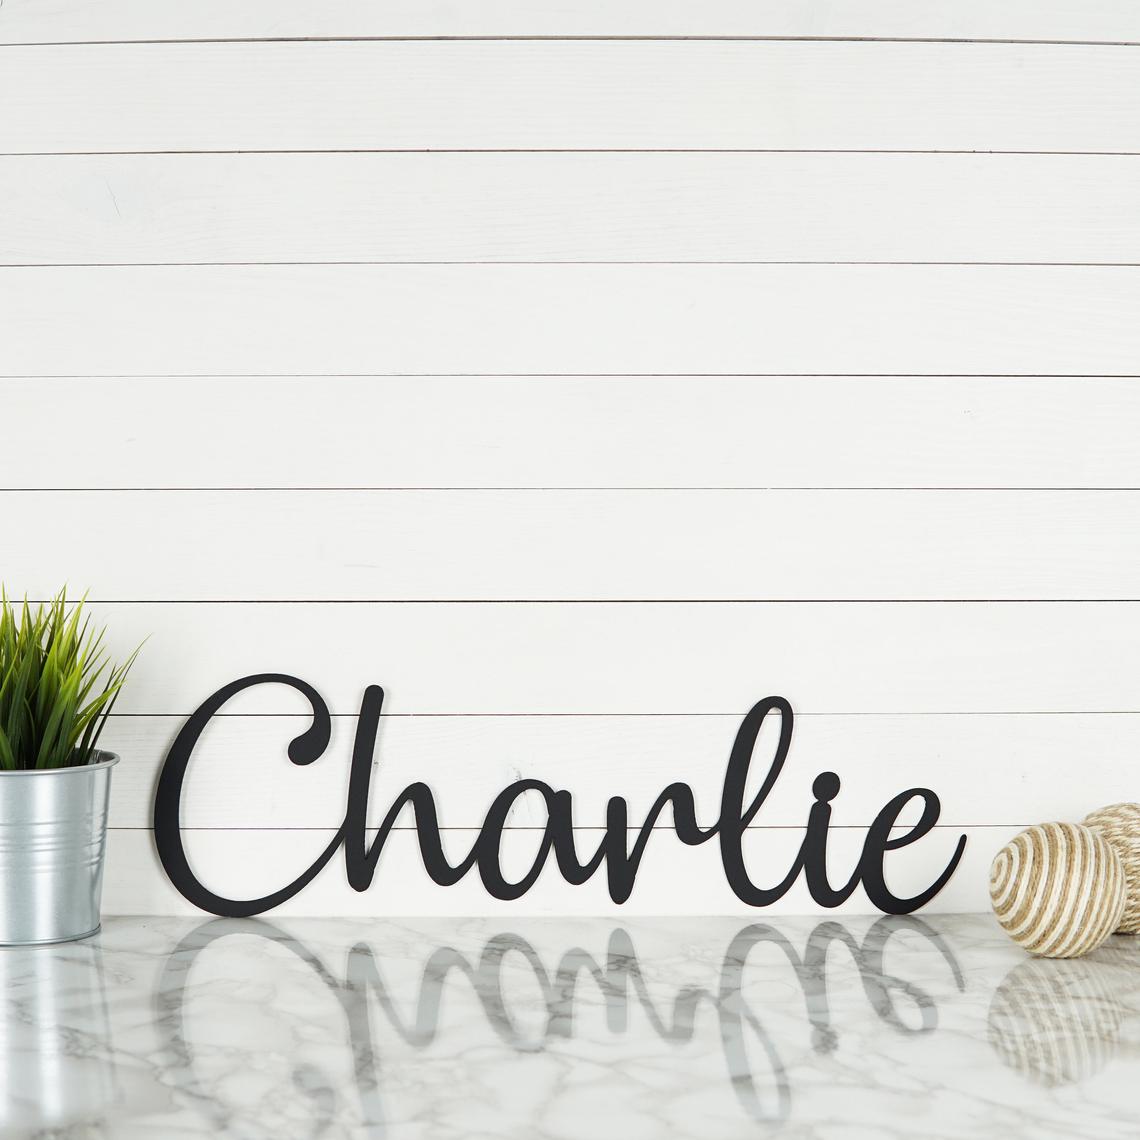 Personalized Name Sign | Baby Name Sign | Nursery Name Sign | Metal Name Sign | Over Crib Sign | Nursery Wall Decor | Baby Shower Gift